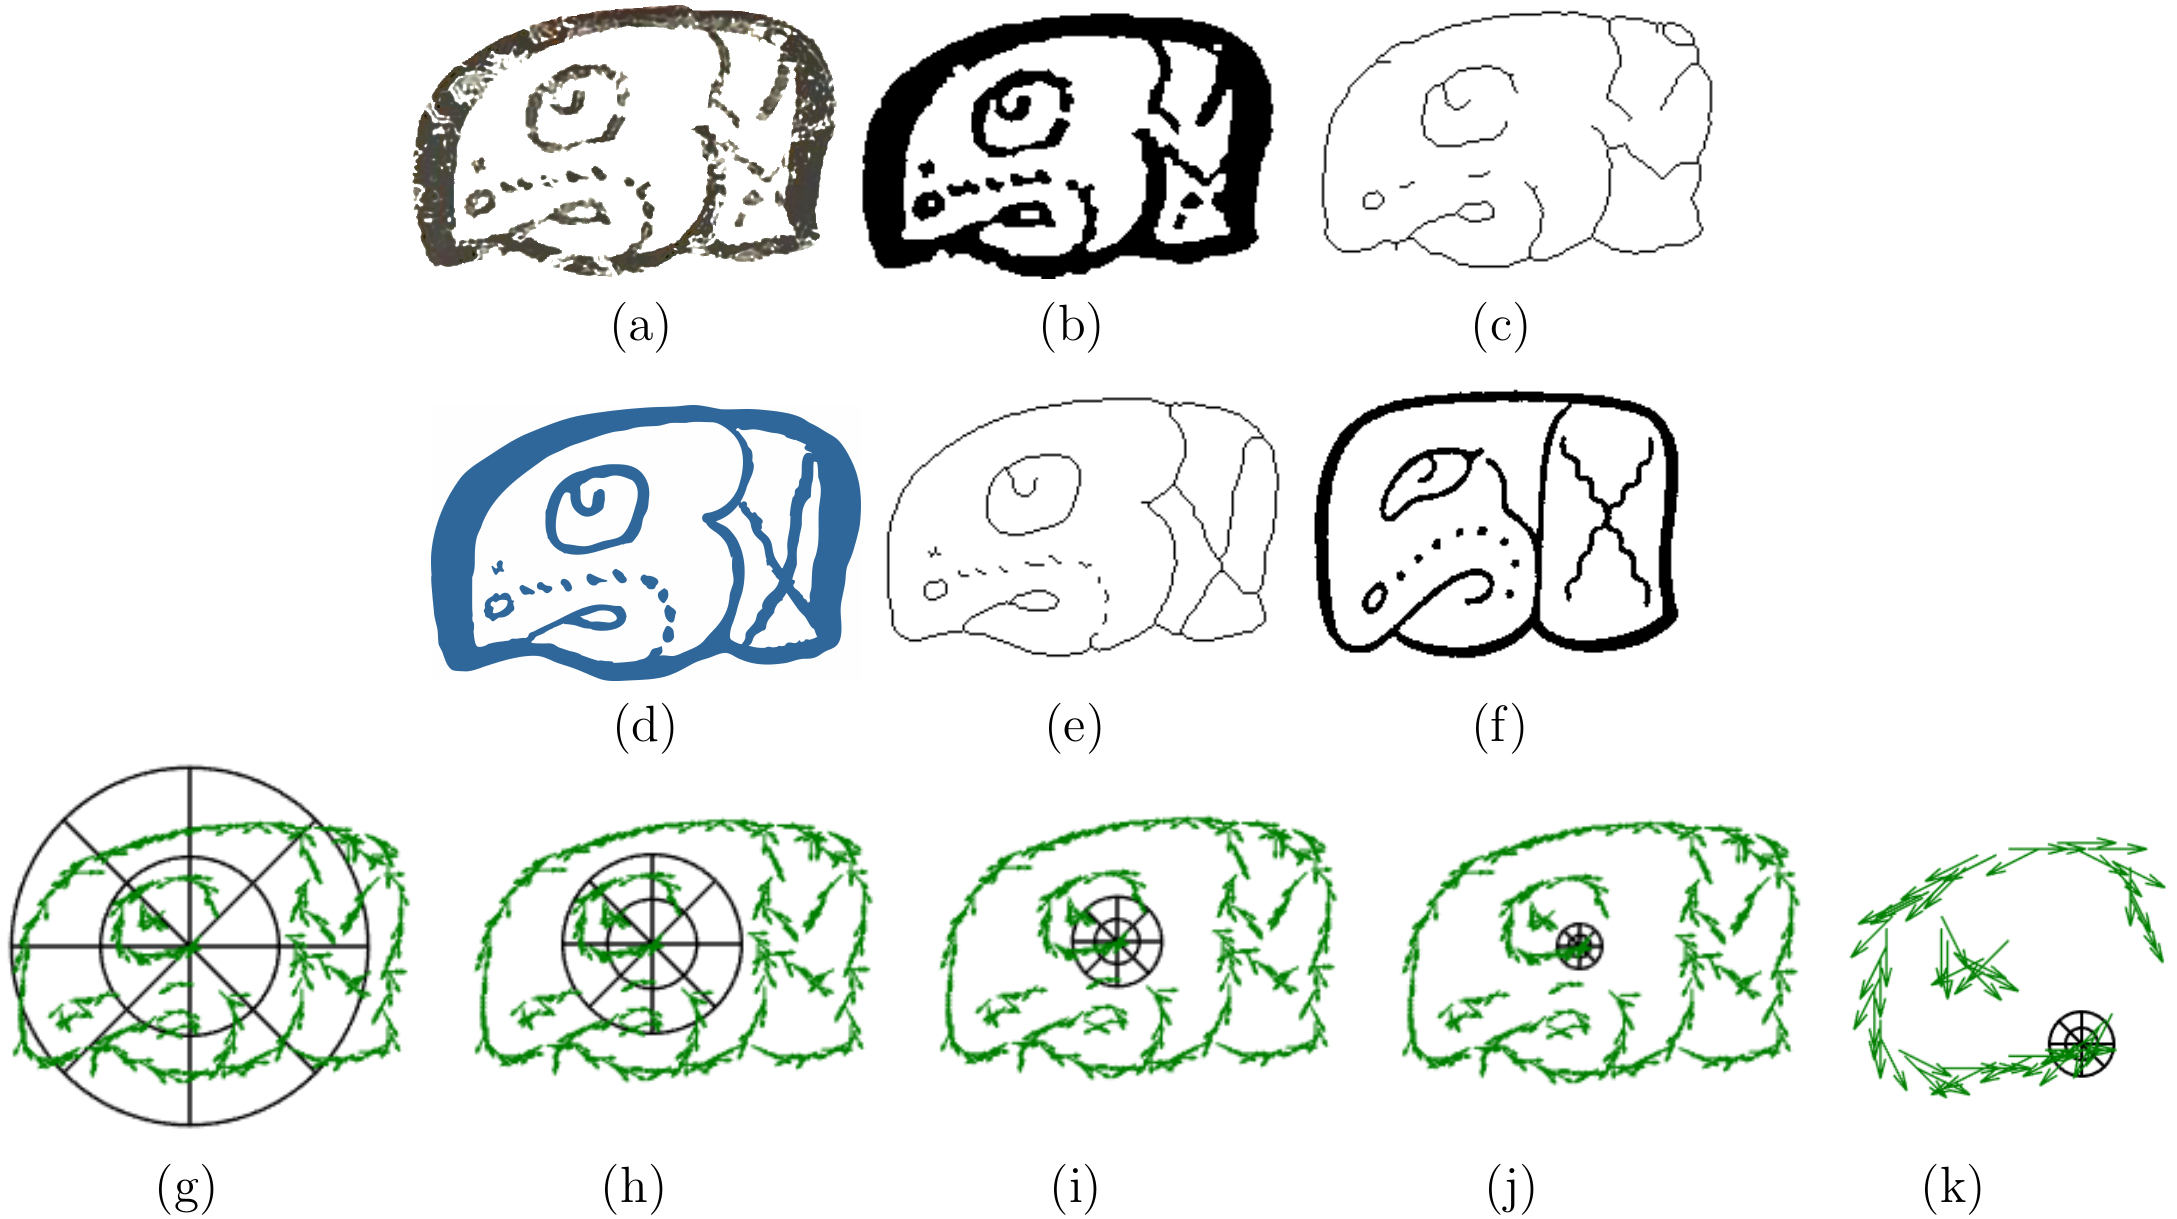 Figure 7. Extracting HOOSC descriptor: (a) input clean raster image; (b) binary image; (c) thinned edge of (b); (d) reconstructed vector representation of (a); (e) thinned edge of (d); (f) corresponding groundtruth image in the catalog; (g)-(k) spatial partition of a same pivot point with five different ring sizes (1, ½, ¼, 1/8, 1/16, all defined as a proportion to the mean of the pairwise distance between pivot points) on the local orientation field of the thinned edge image (c). Note that we zoomed in to show the spatial context of 1/16 in (k).